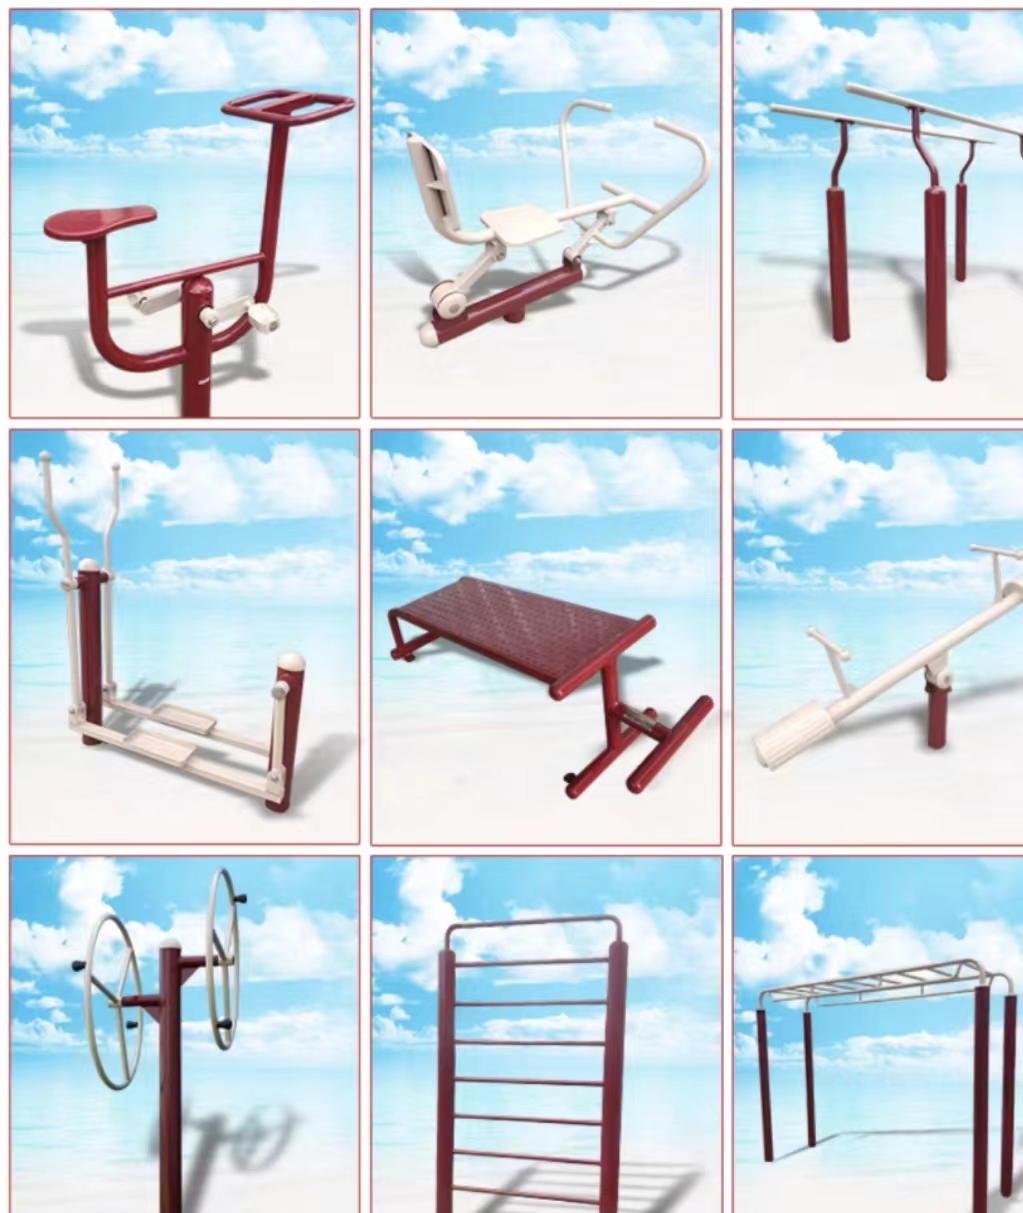 Outdoor fitness equipment community square combination path manufacturer provides sports equipment